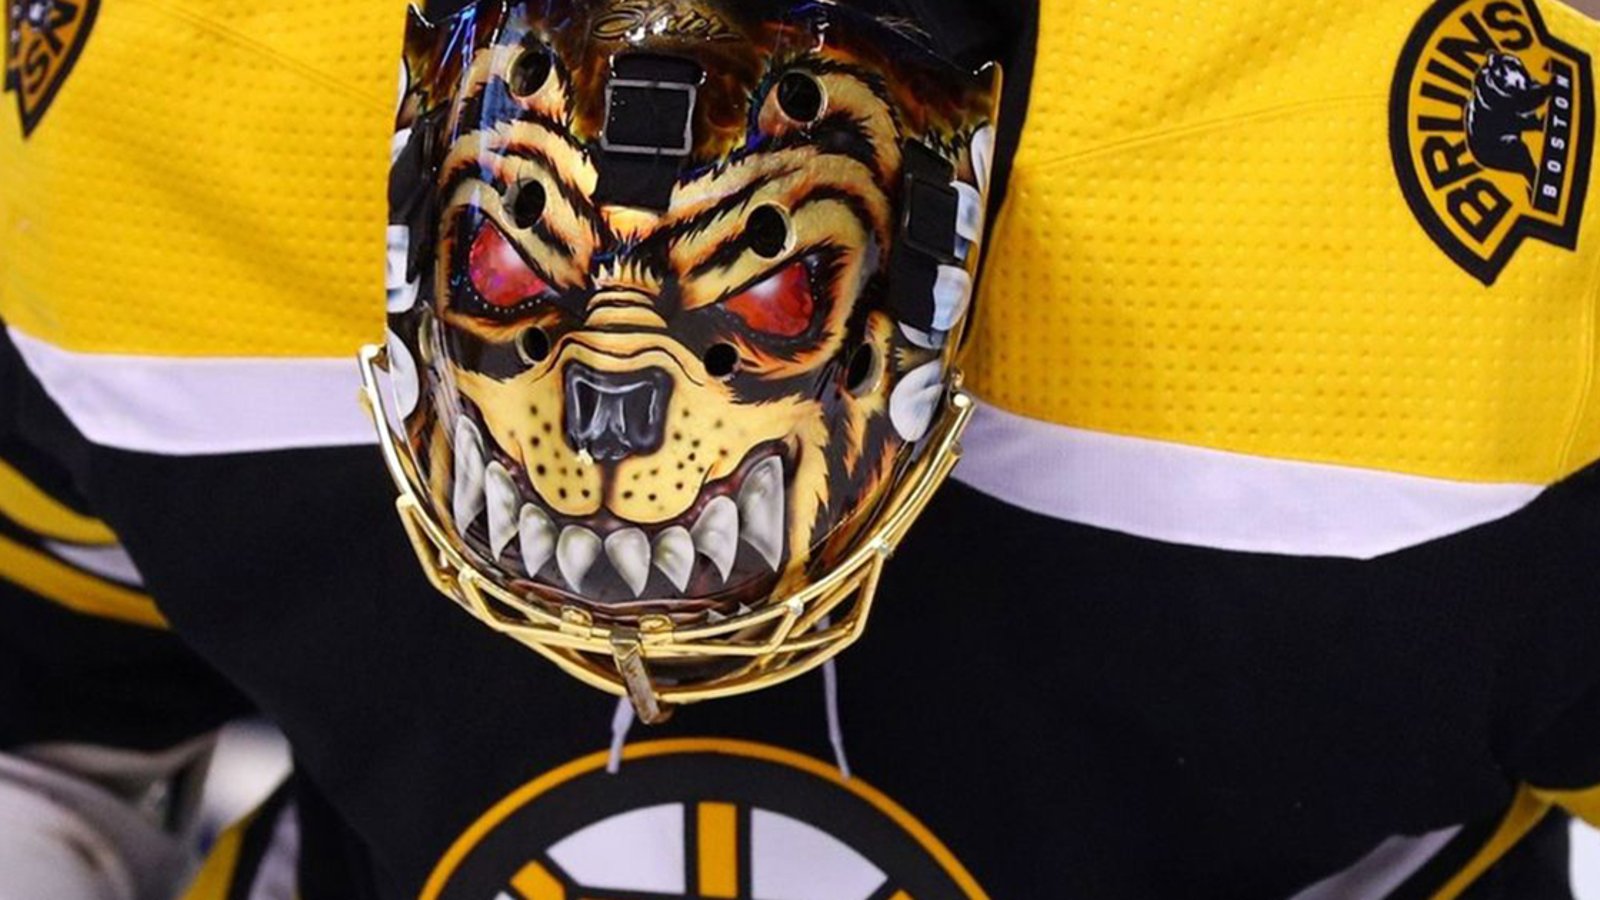 Injury Report: The absolute worst has been confirmed for Rask